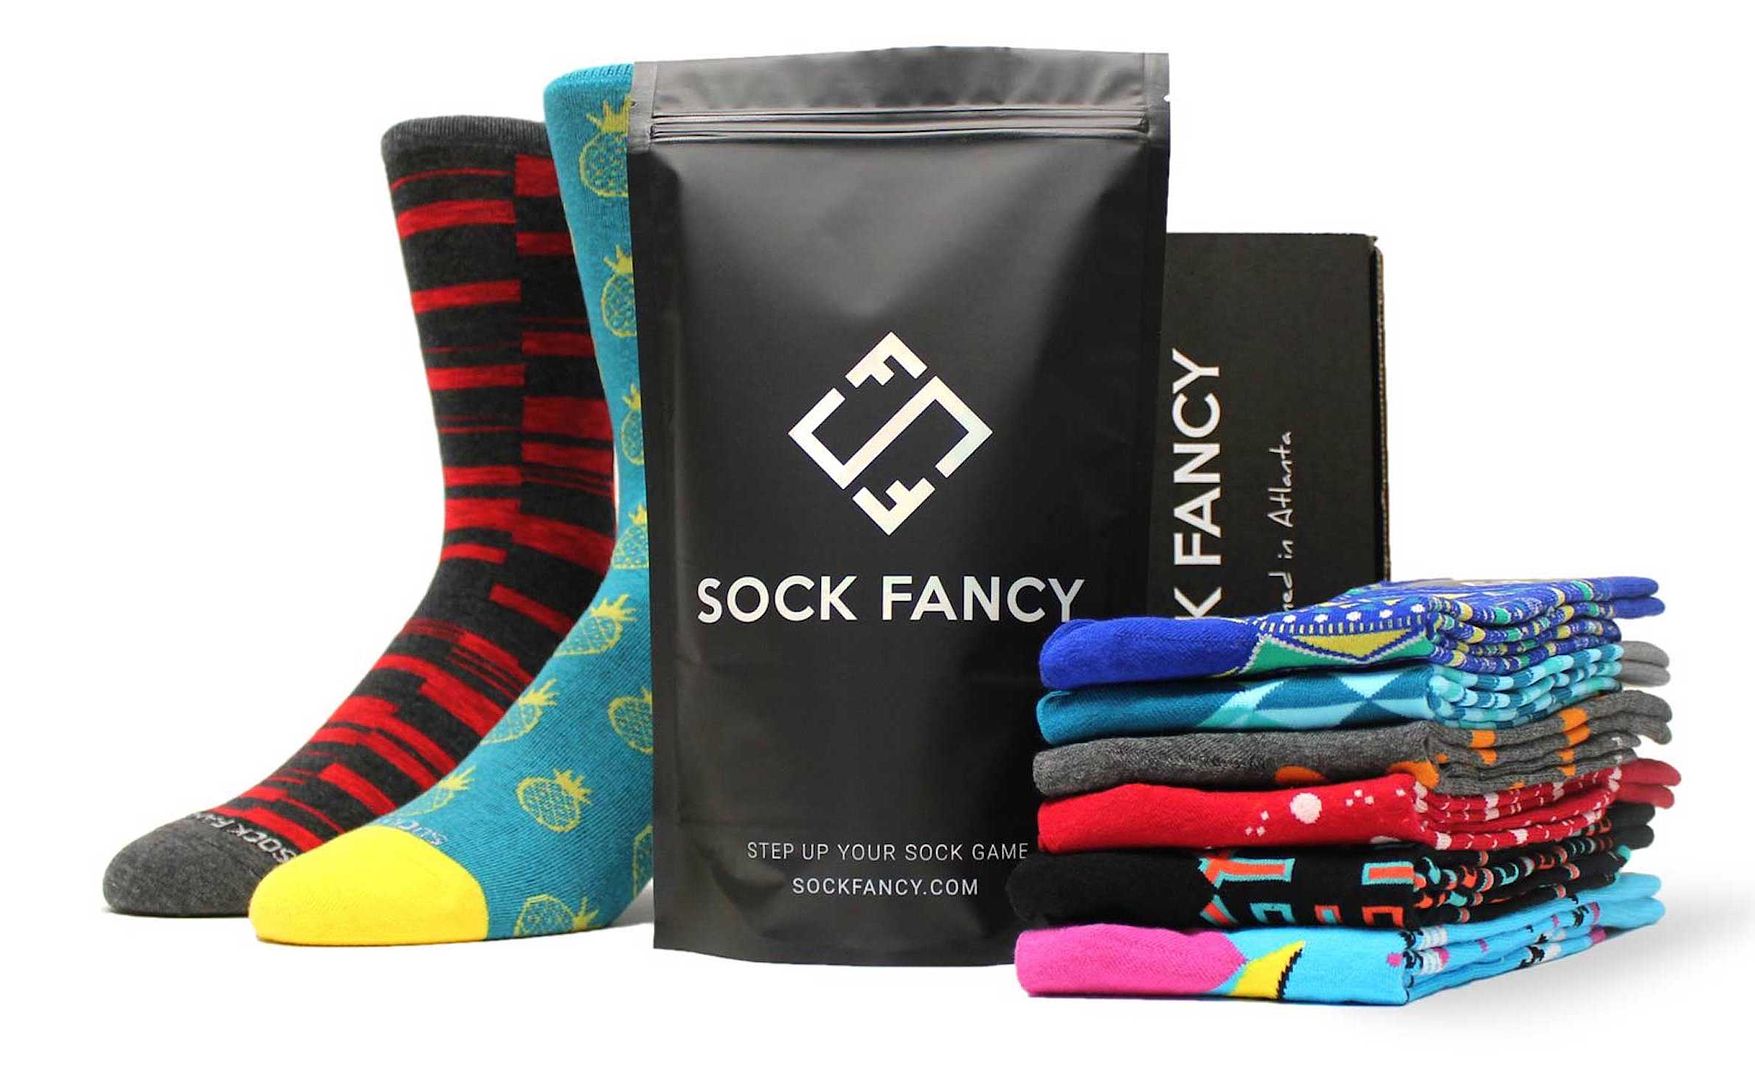 Practical gift ideas for Father's Day: A sock subscription that bends men's style and convenience